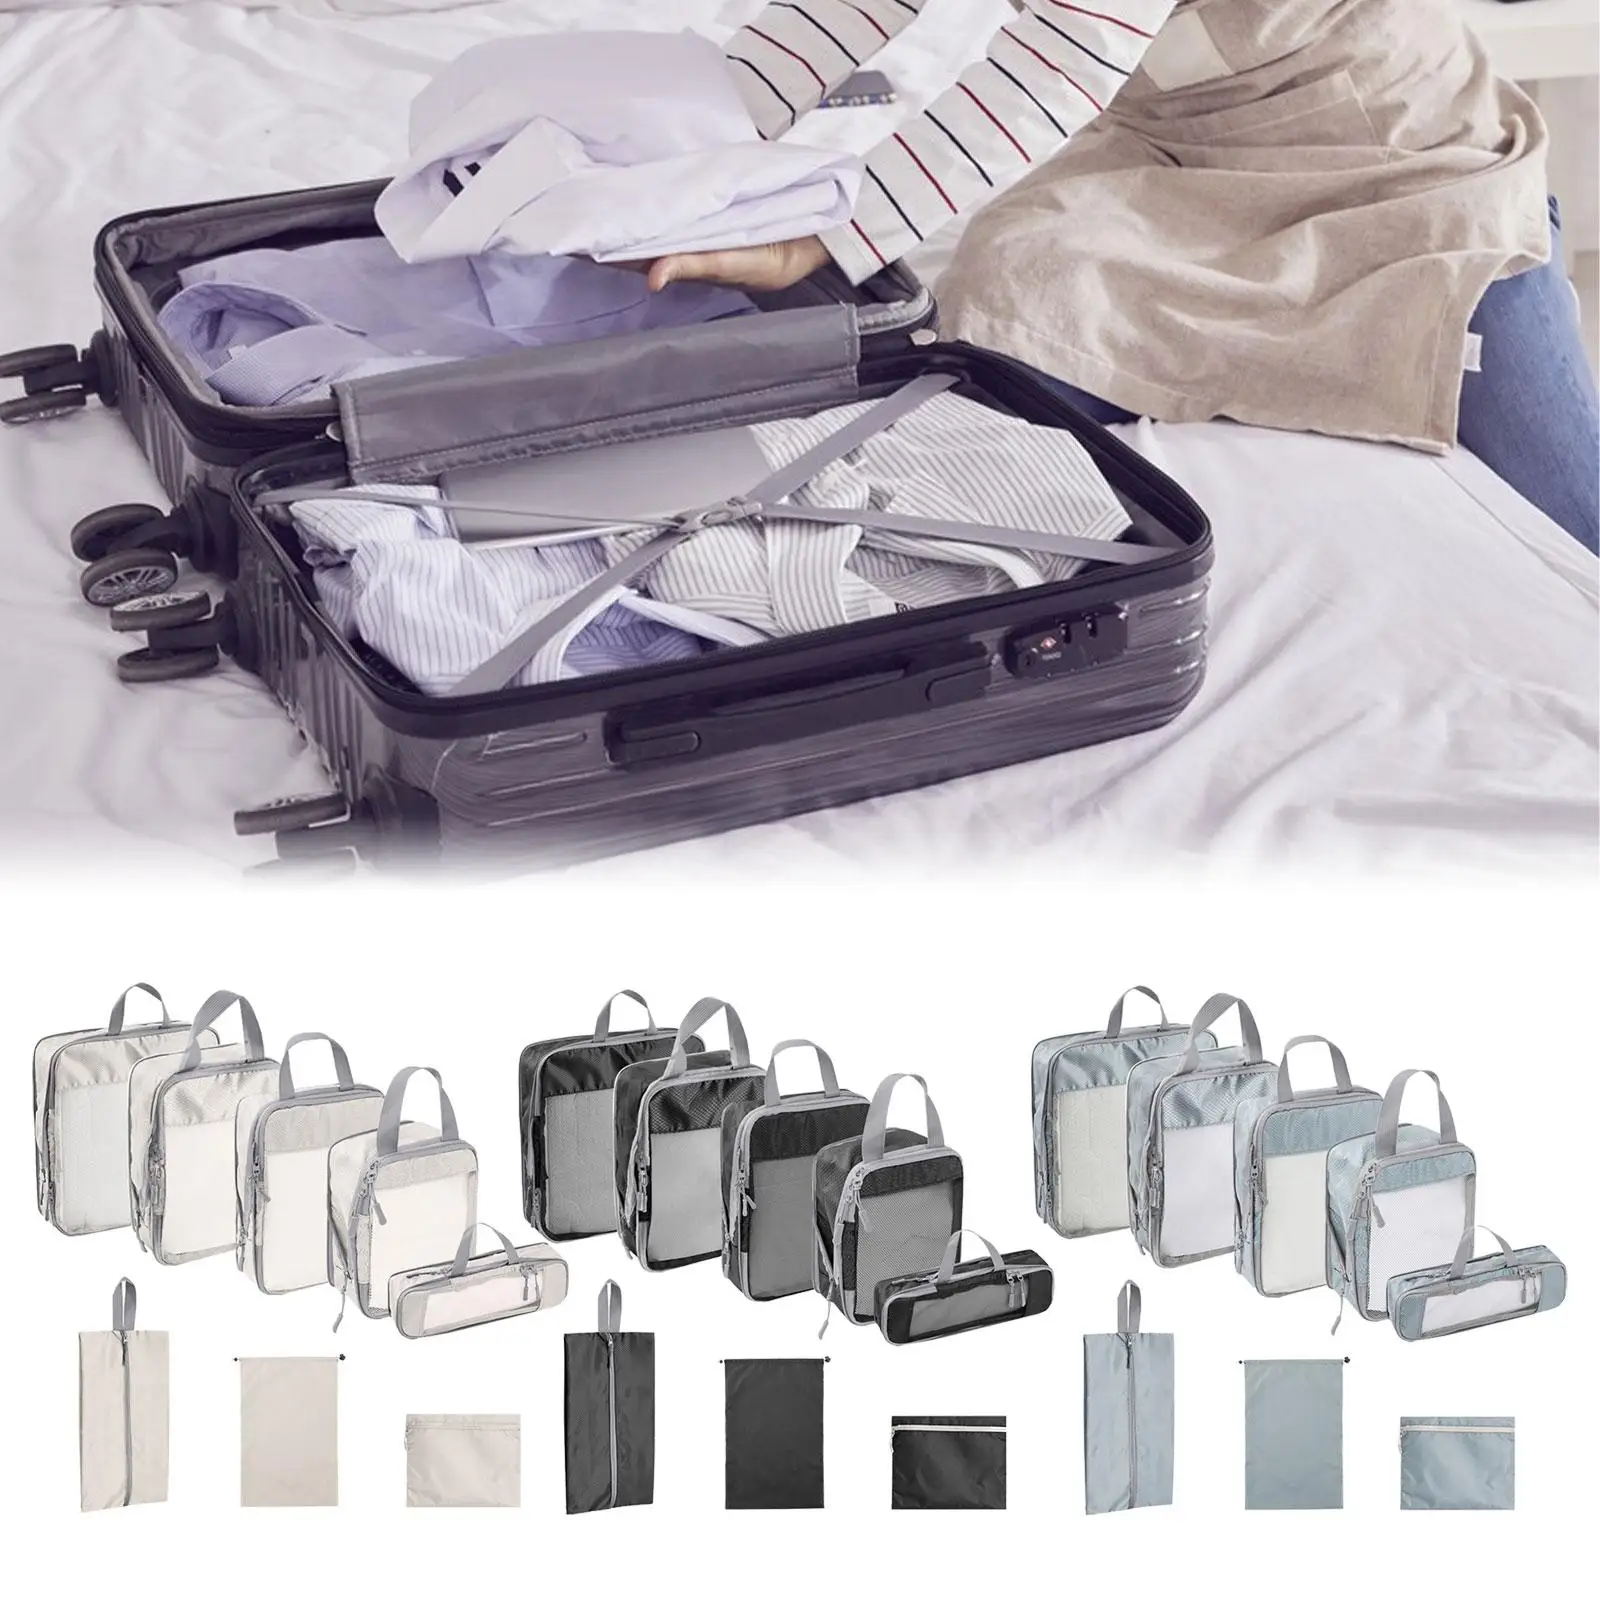 8Pcs Portable Packing Cubes Can Be Hung Zipper Toiletry Bag Luggage Bags for Backpacking Daily Storage Family Breaks Hiking